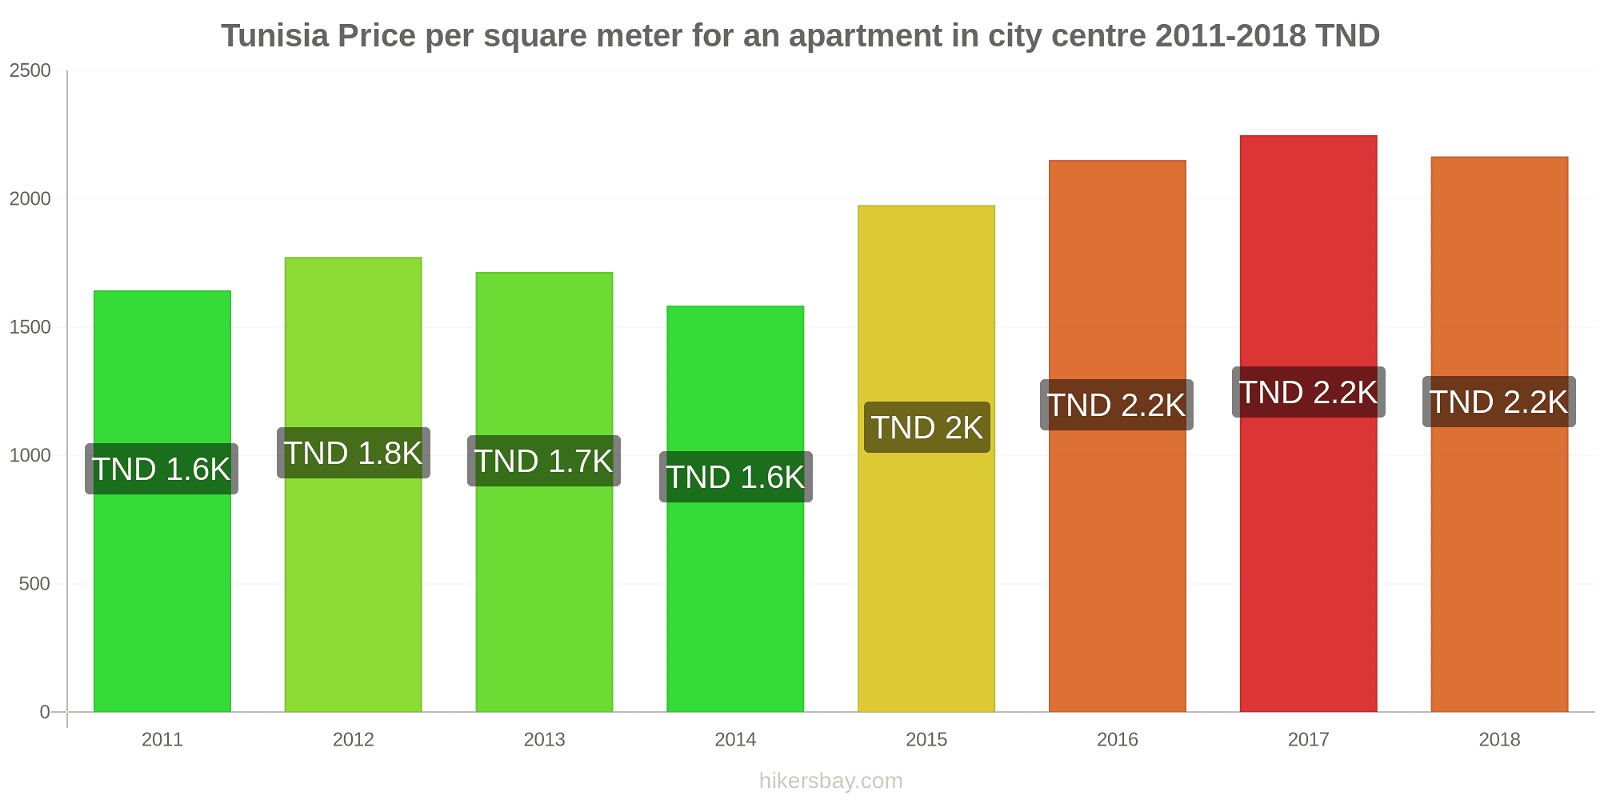 Tunisia price changes Price per square meter for an apartment in the city center hikersbay.com